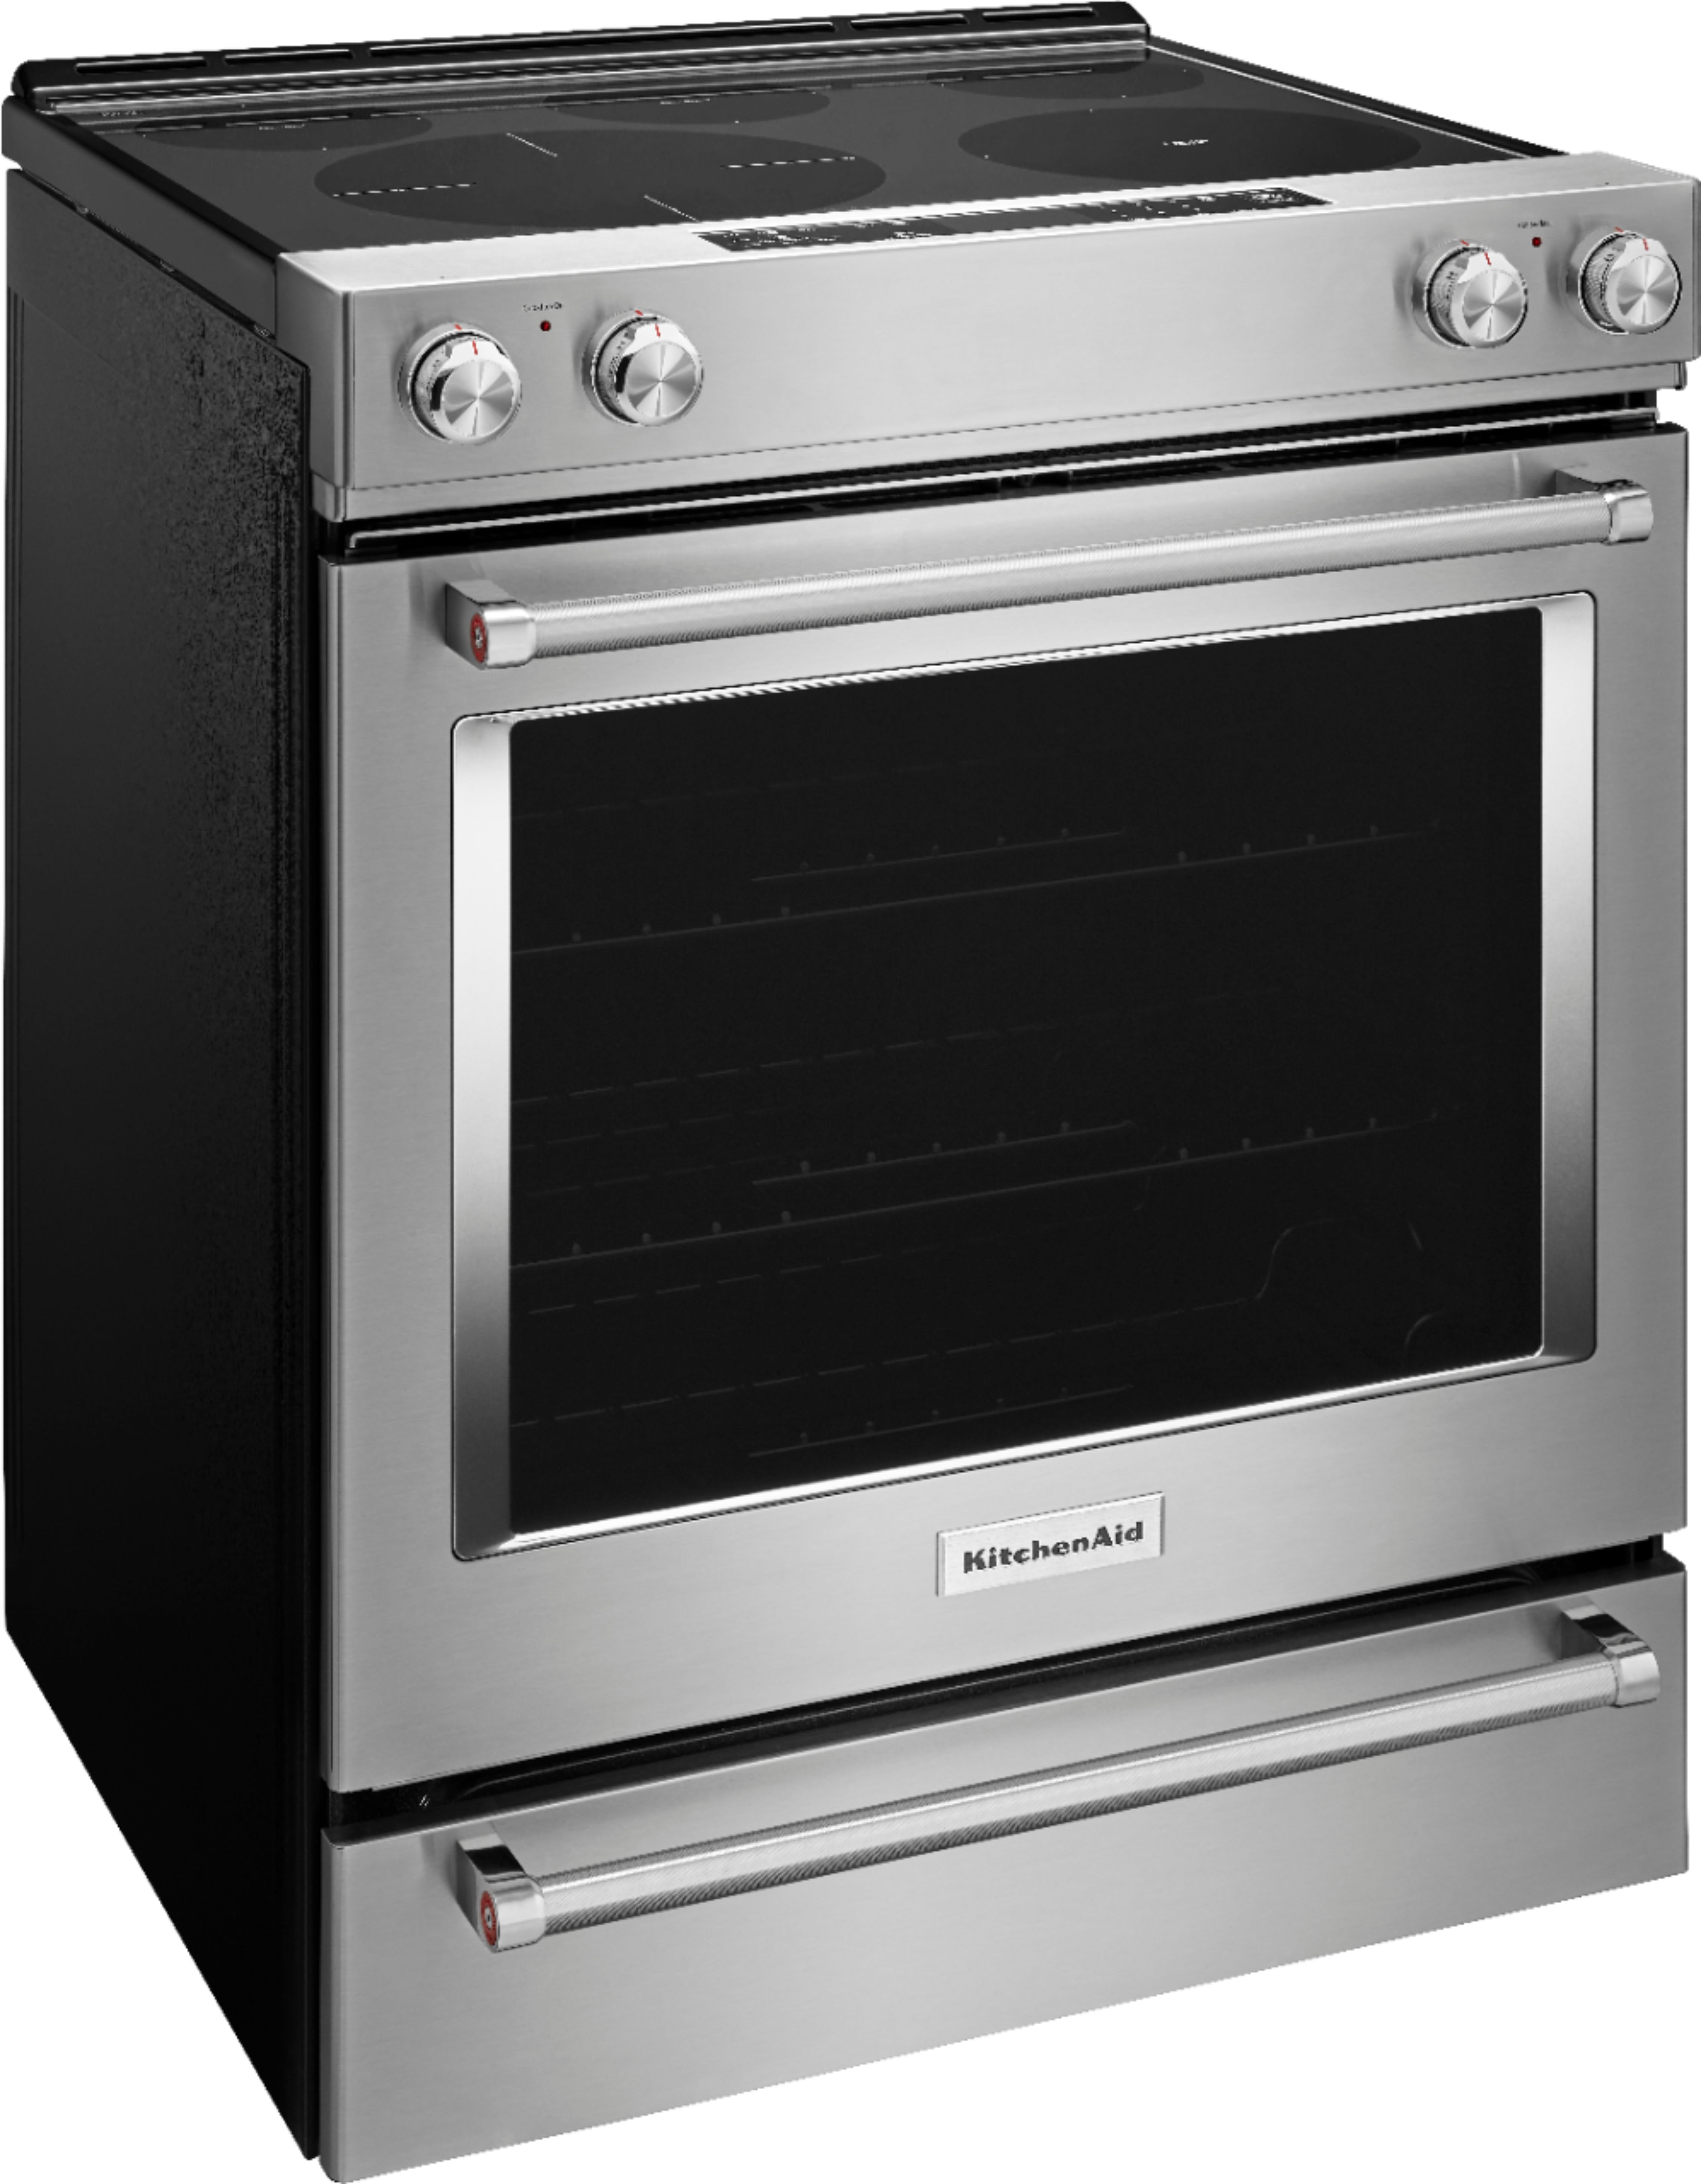 Angle View: GE - 5.3 Cu. Ft. Freestanding Electric Range with Manuanl Cleaning - White